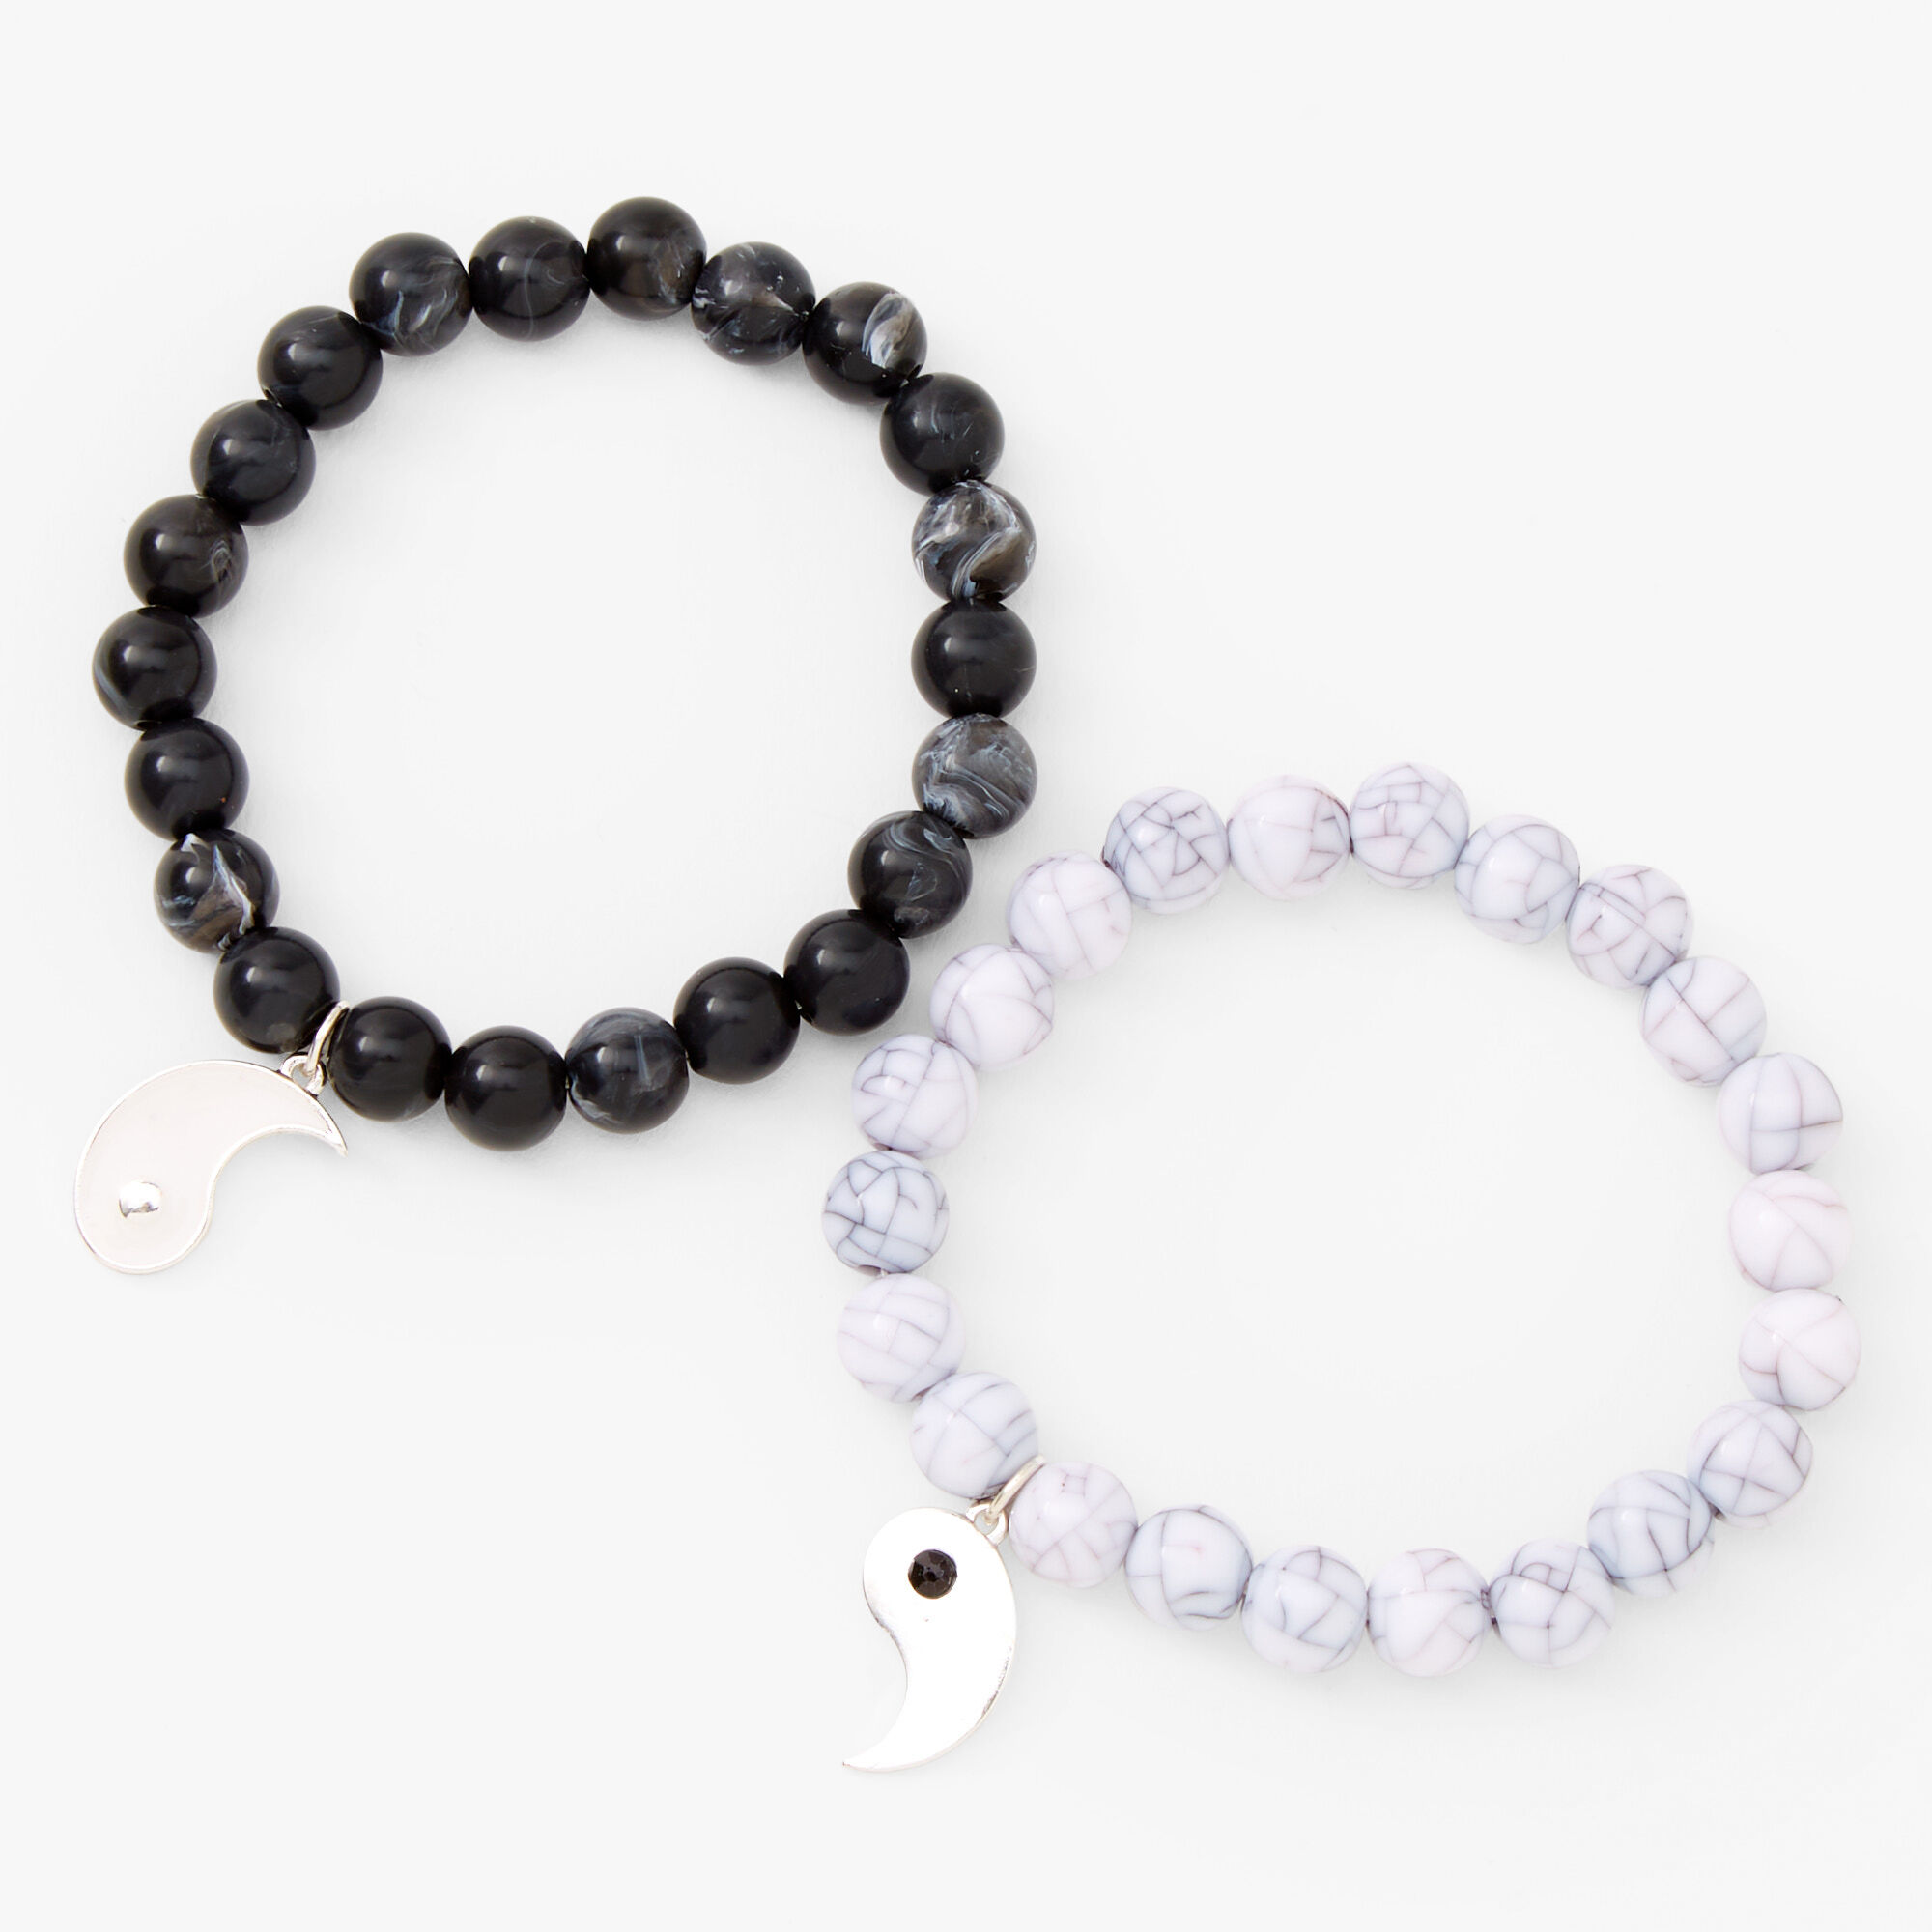 View Claires Yin Yang Marble Beaded Stretch Bracelets 2 Pack Silver information